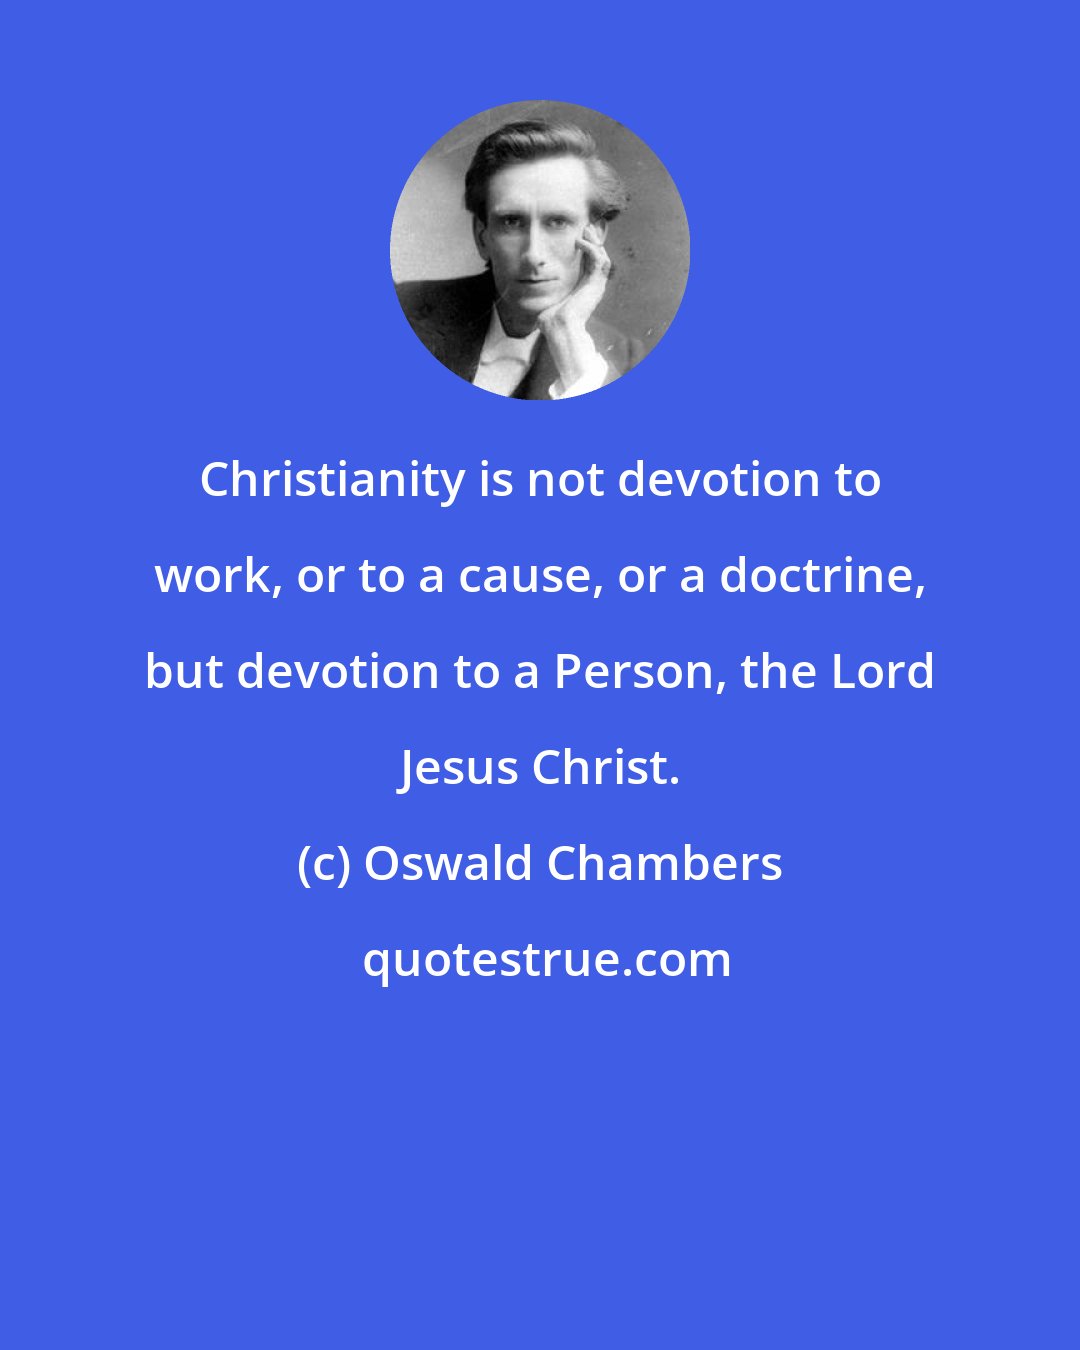 Oswald Chambers: Christianity is not devotion to work, or to a cause, or a doctrine, but devotion to a Person, the Lord Jesus Christ.